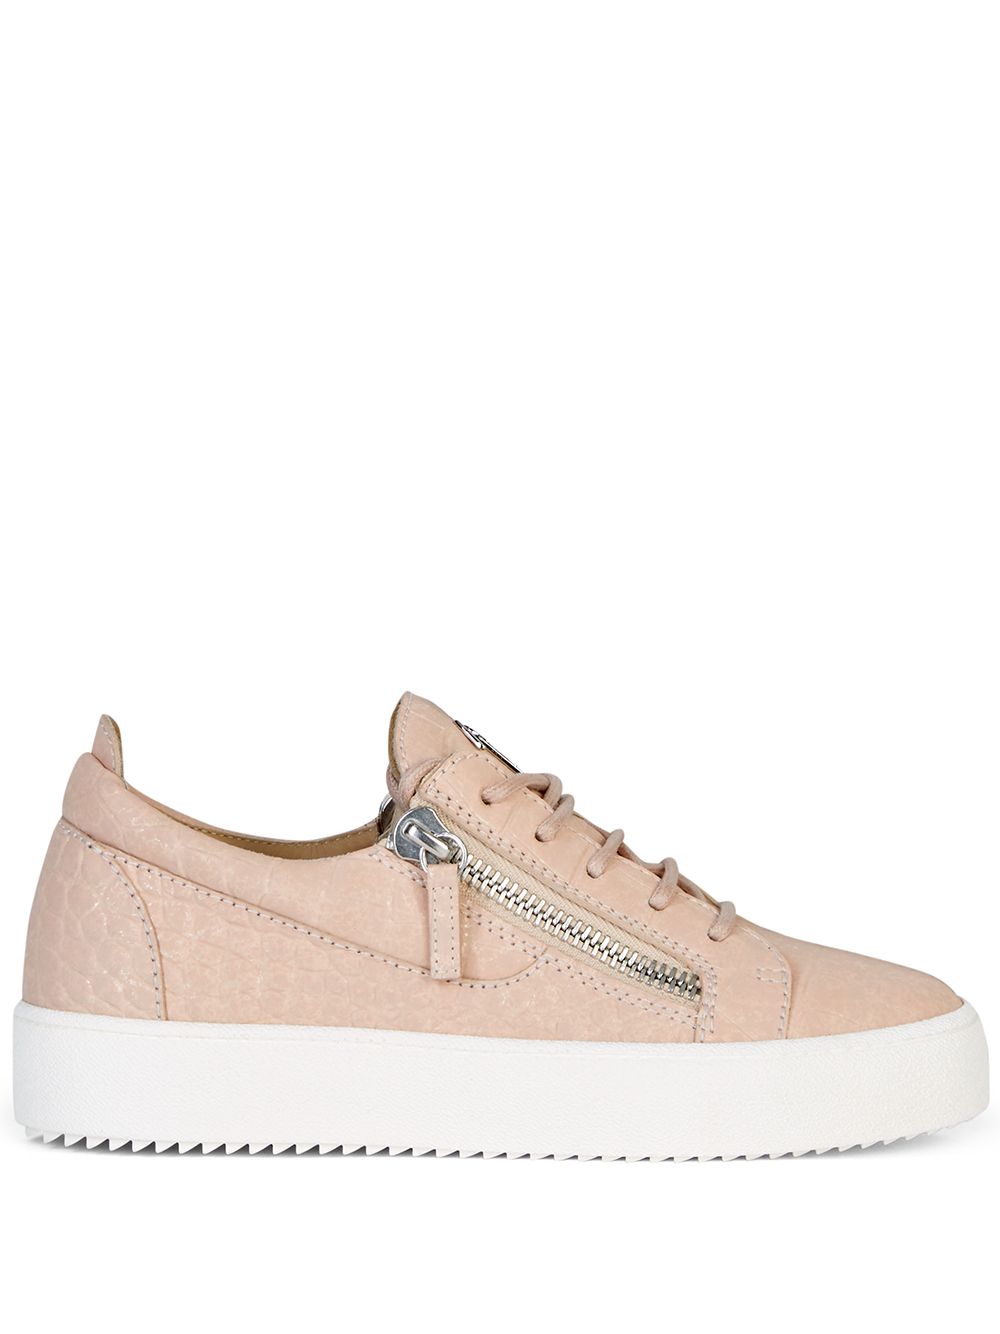 Giuseppe Zanotti Design GIUSEPPE ZANOTTI DESIGN- Gail Leather Sneakers